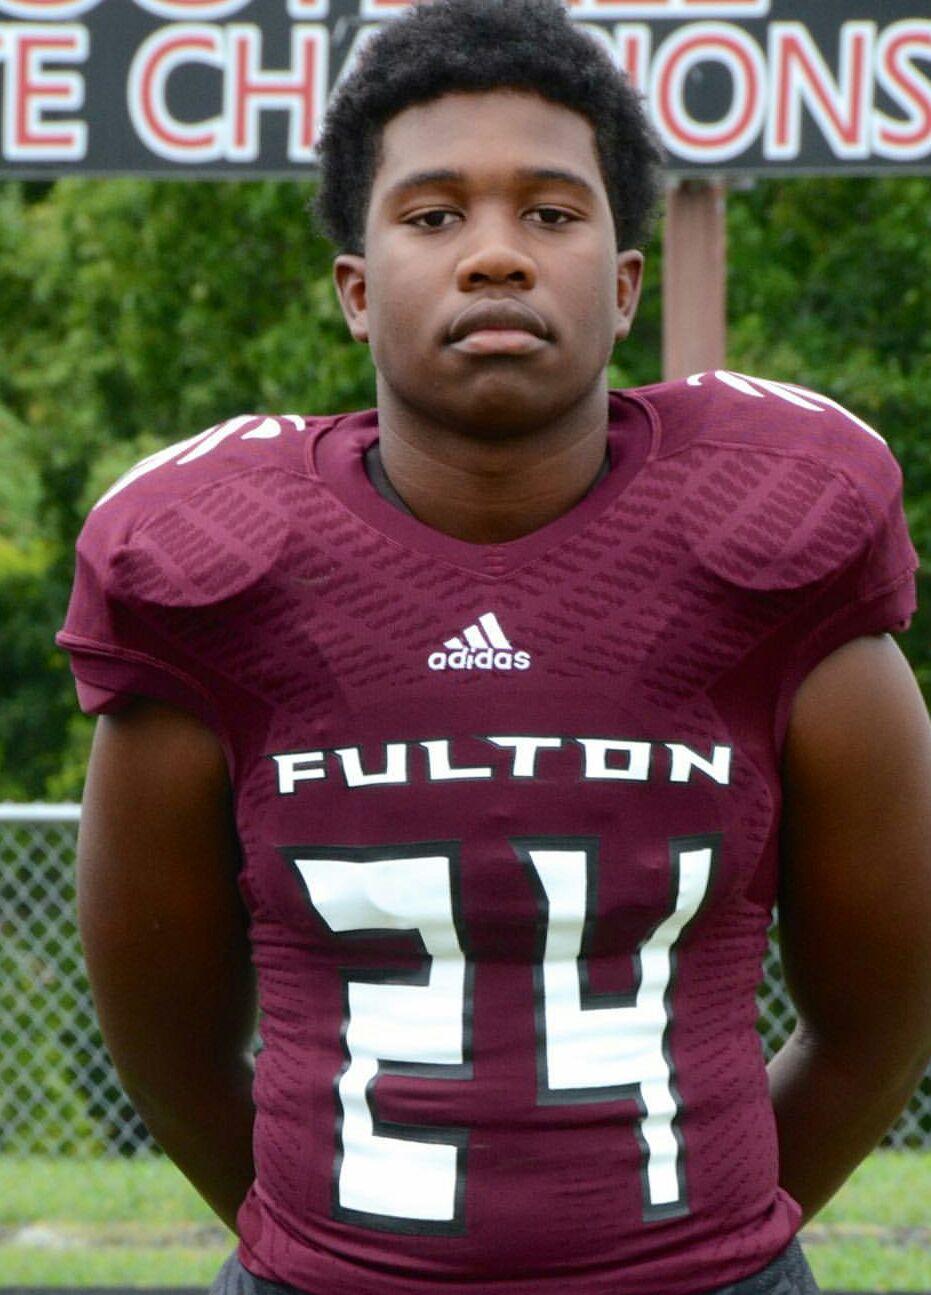 Zaevion Dobson was shot to death on Dec. 17, 2015, in Knoxville, Tenn. (Knox County Schools/AP)